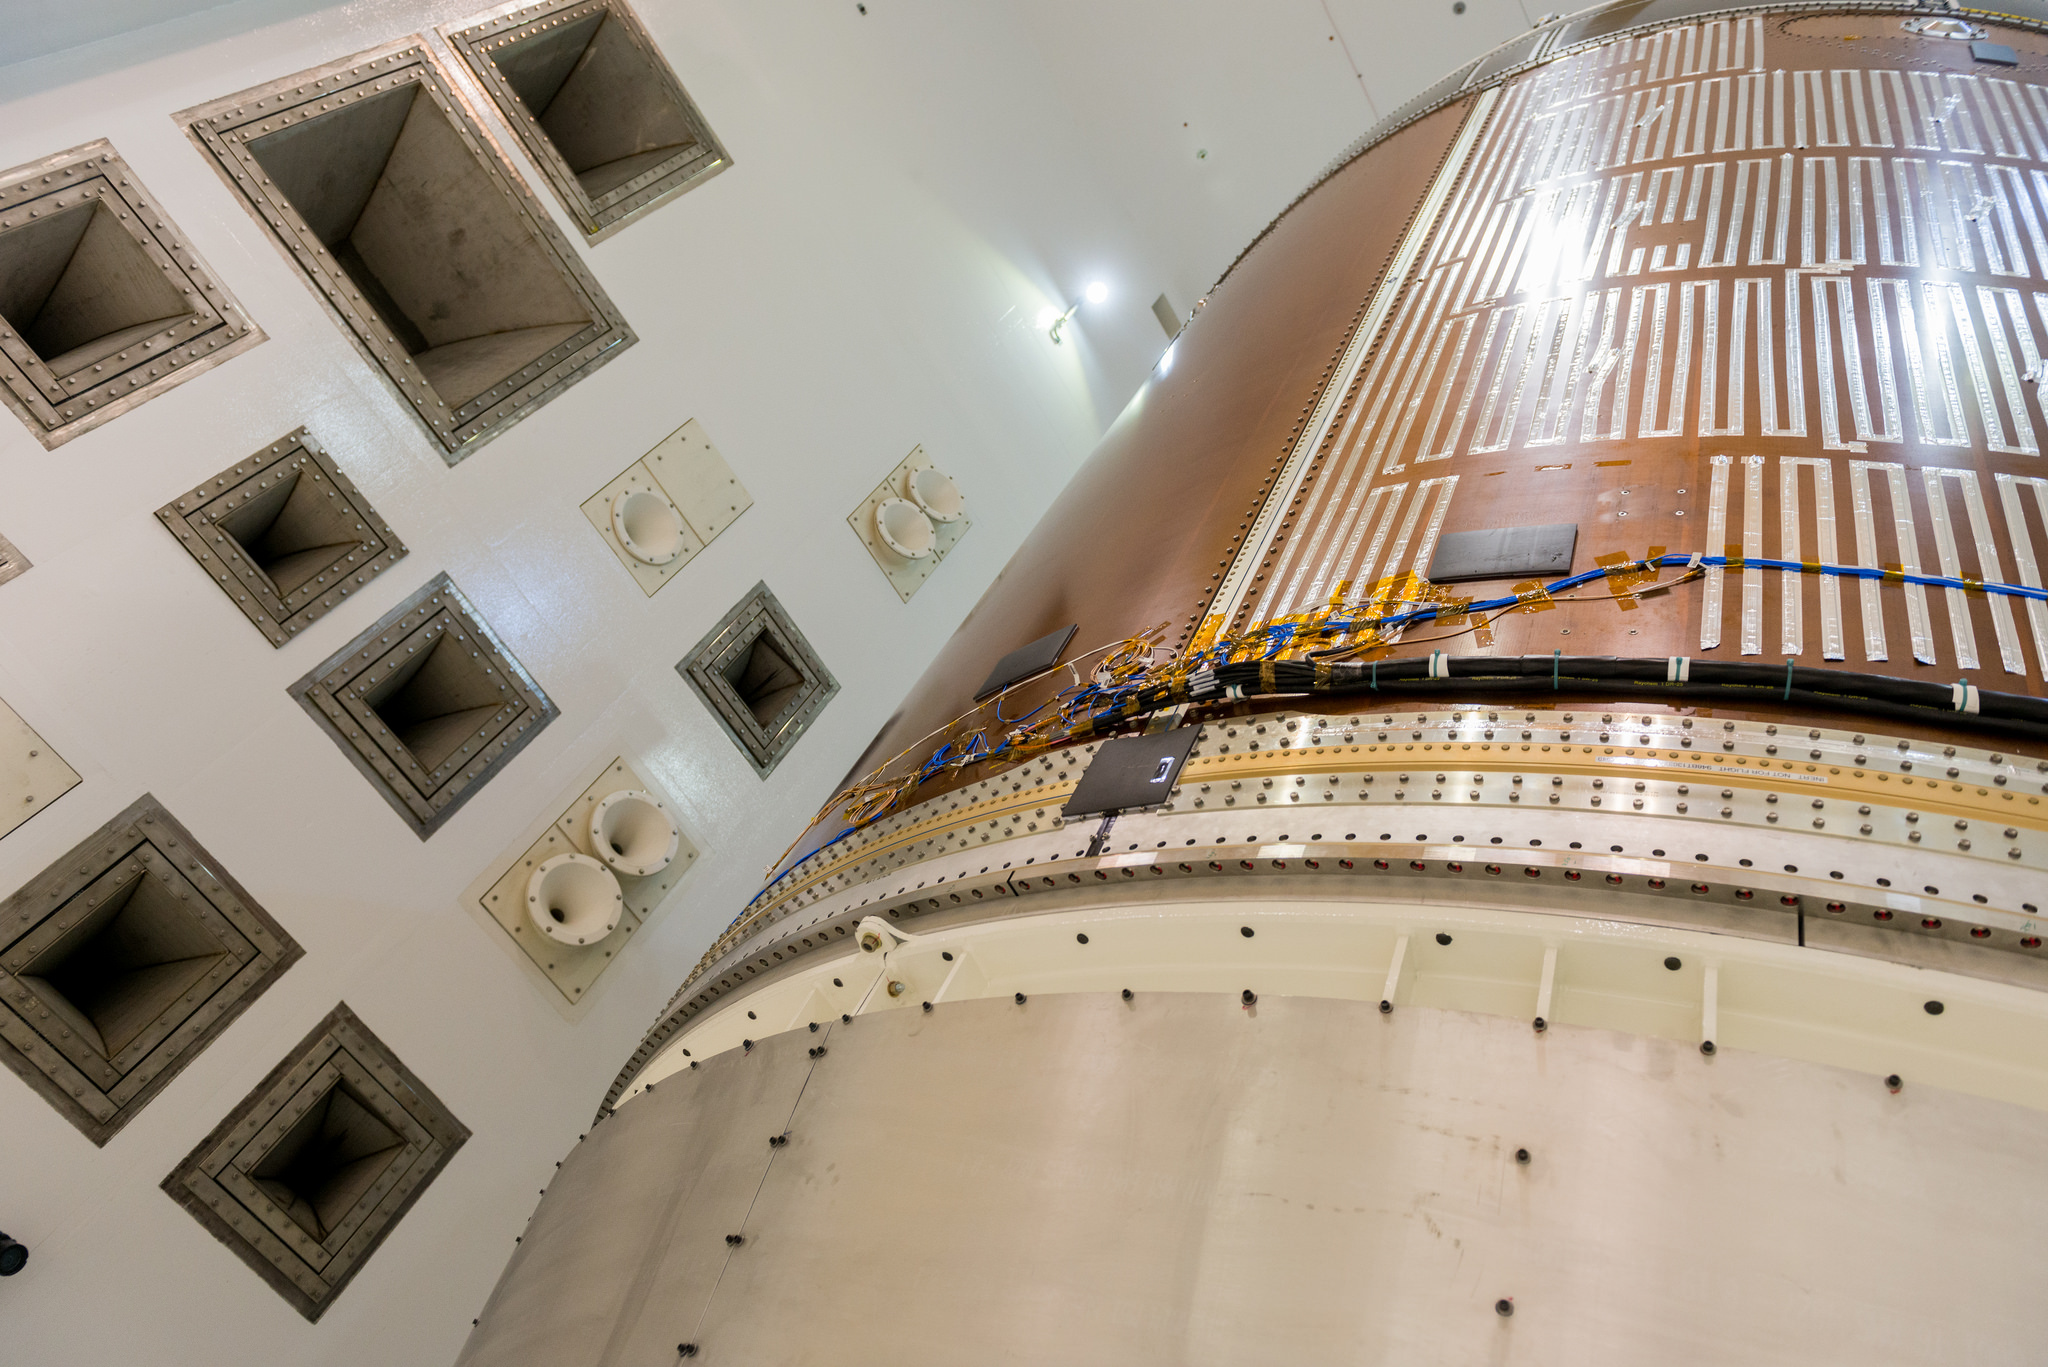 Acoustic tests performed on Orion’s Service Module